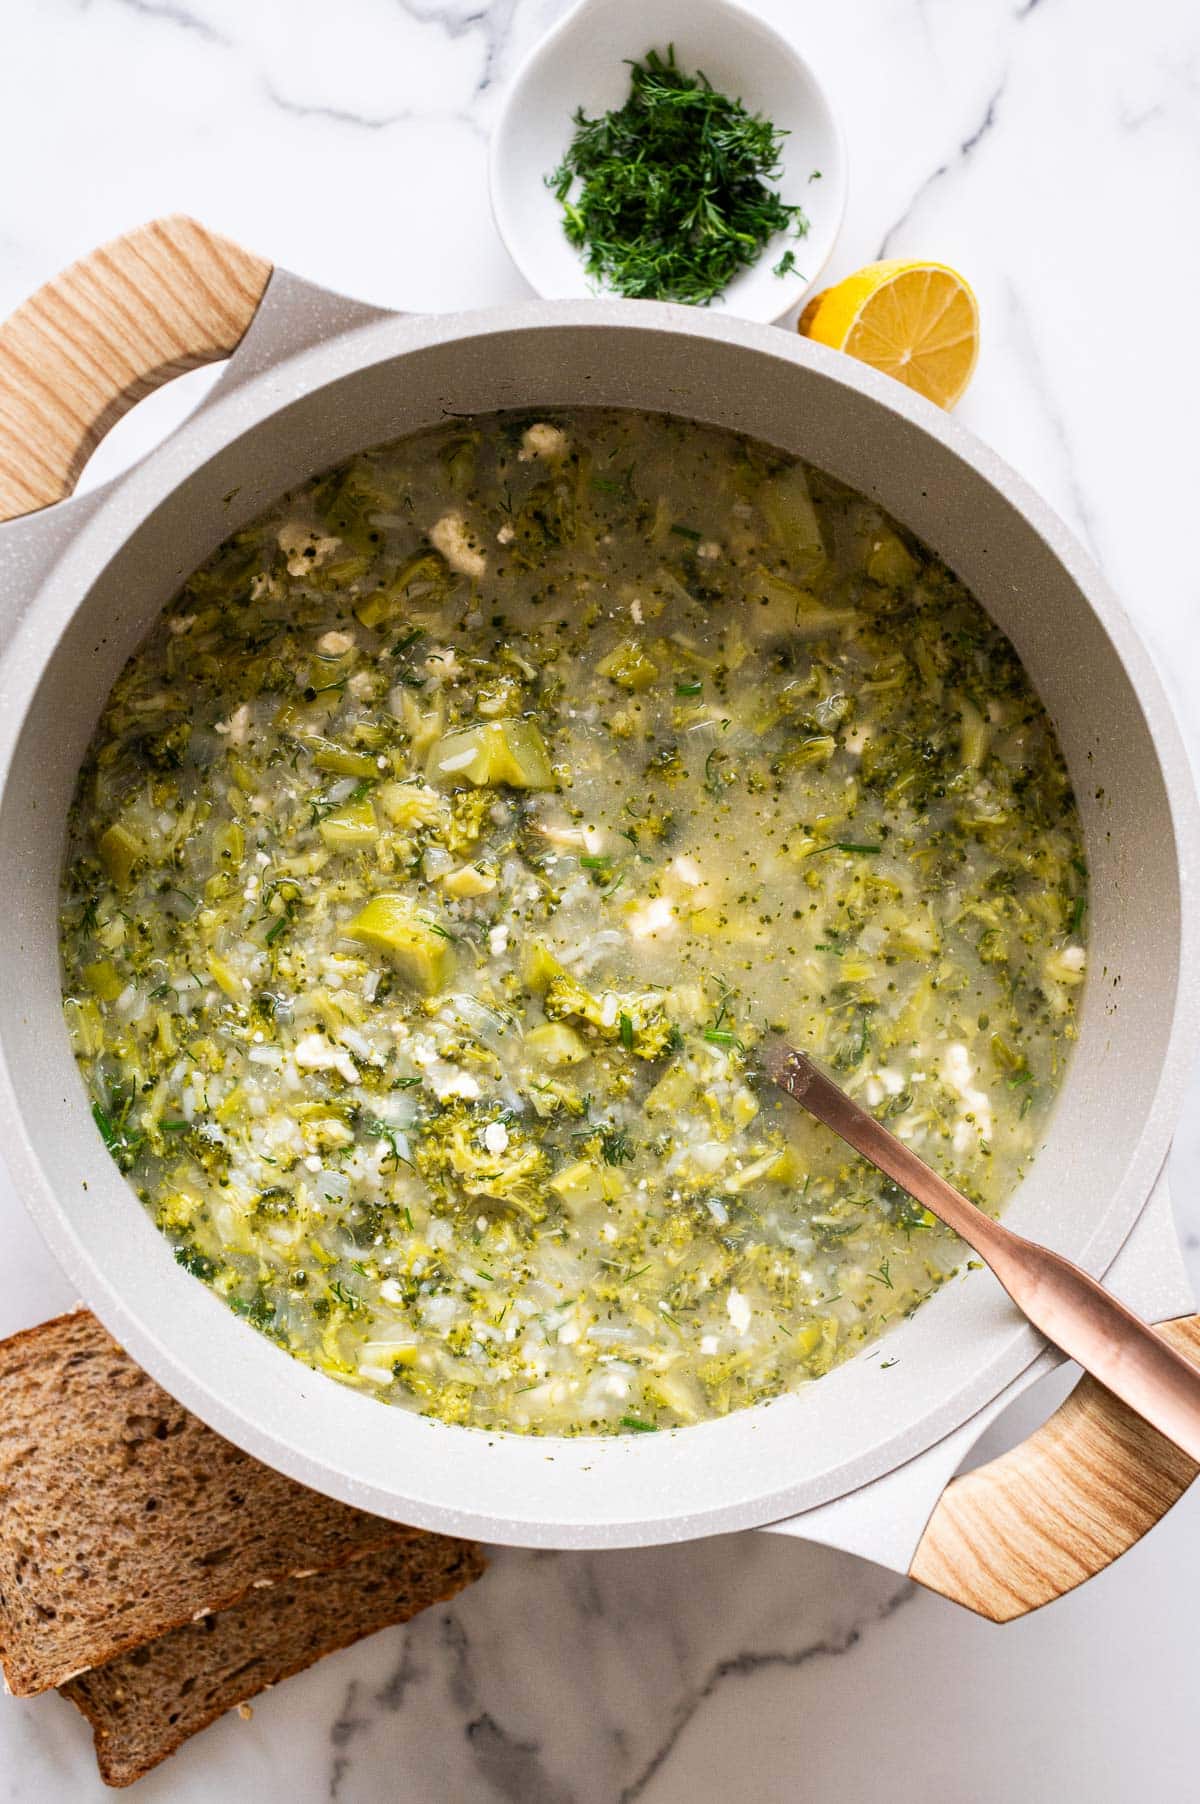 Broccoli feta soup in a pot with ladle. Dill, lemon and bread on a counter.